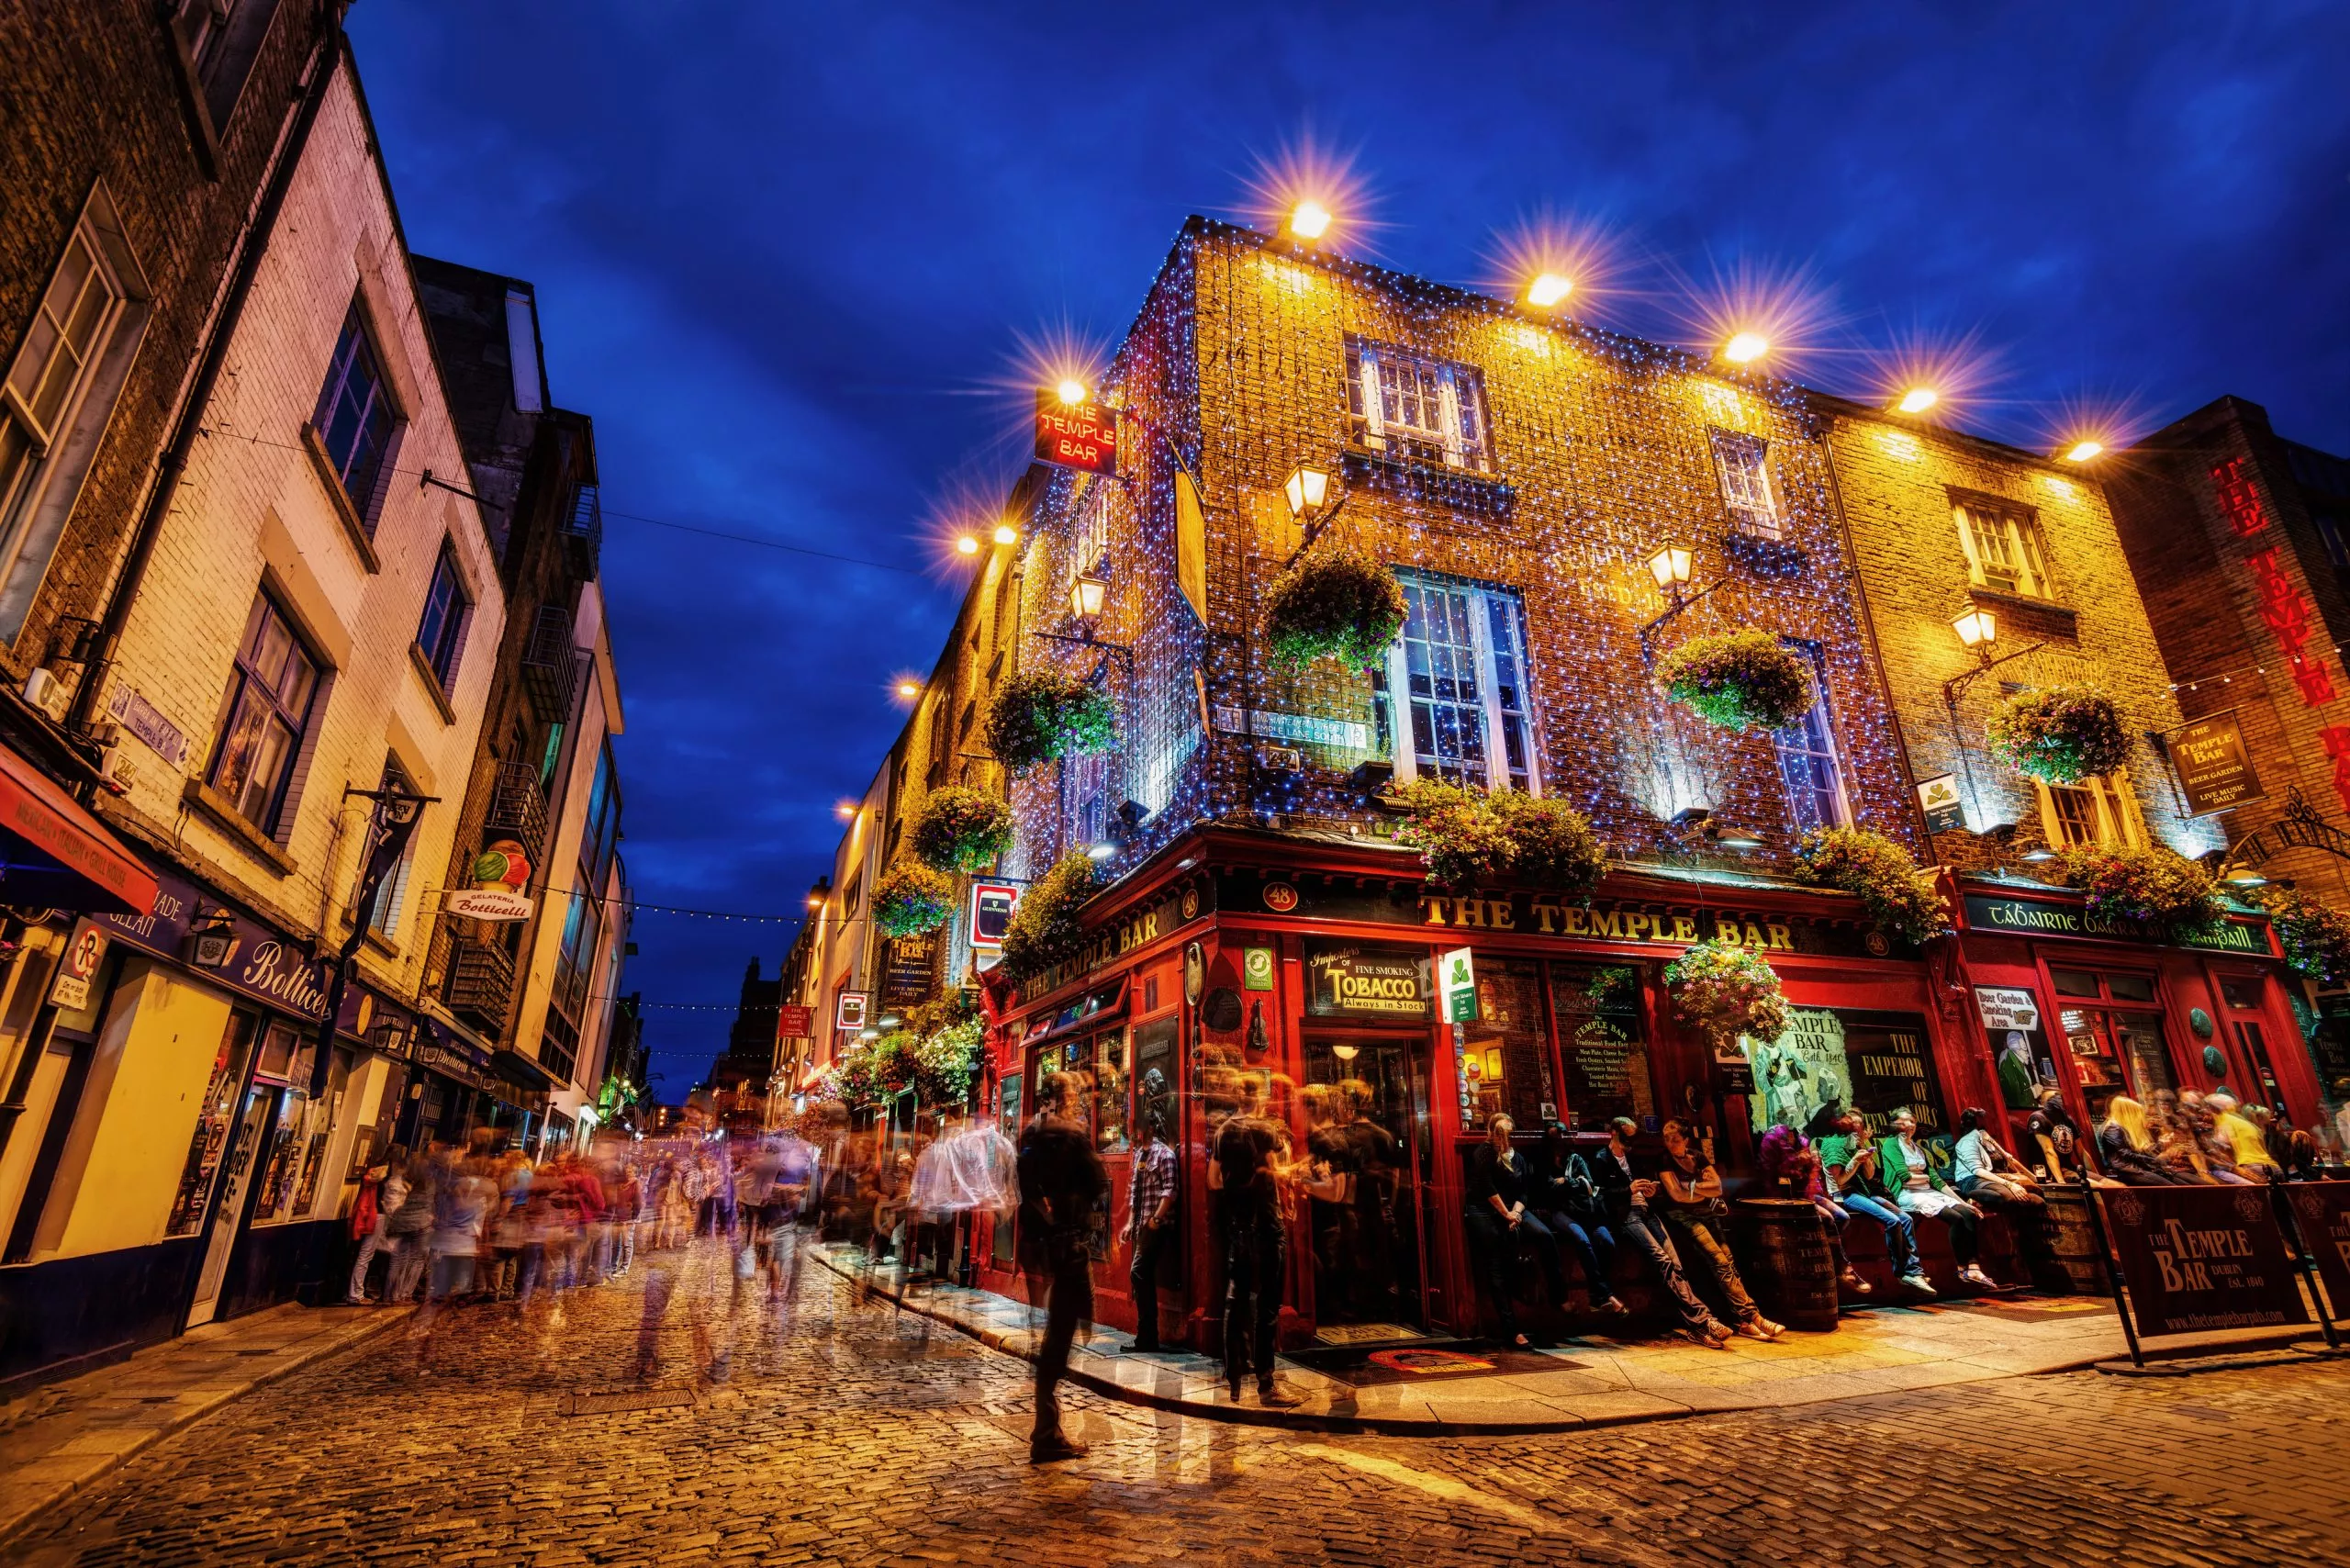 Little Temple Bar in France, Europe | Bars,Darts - Rated 4.2